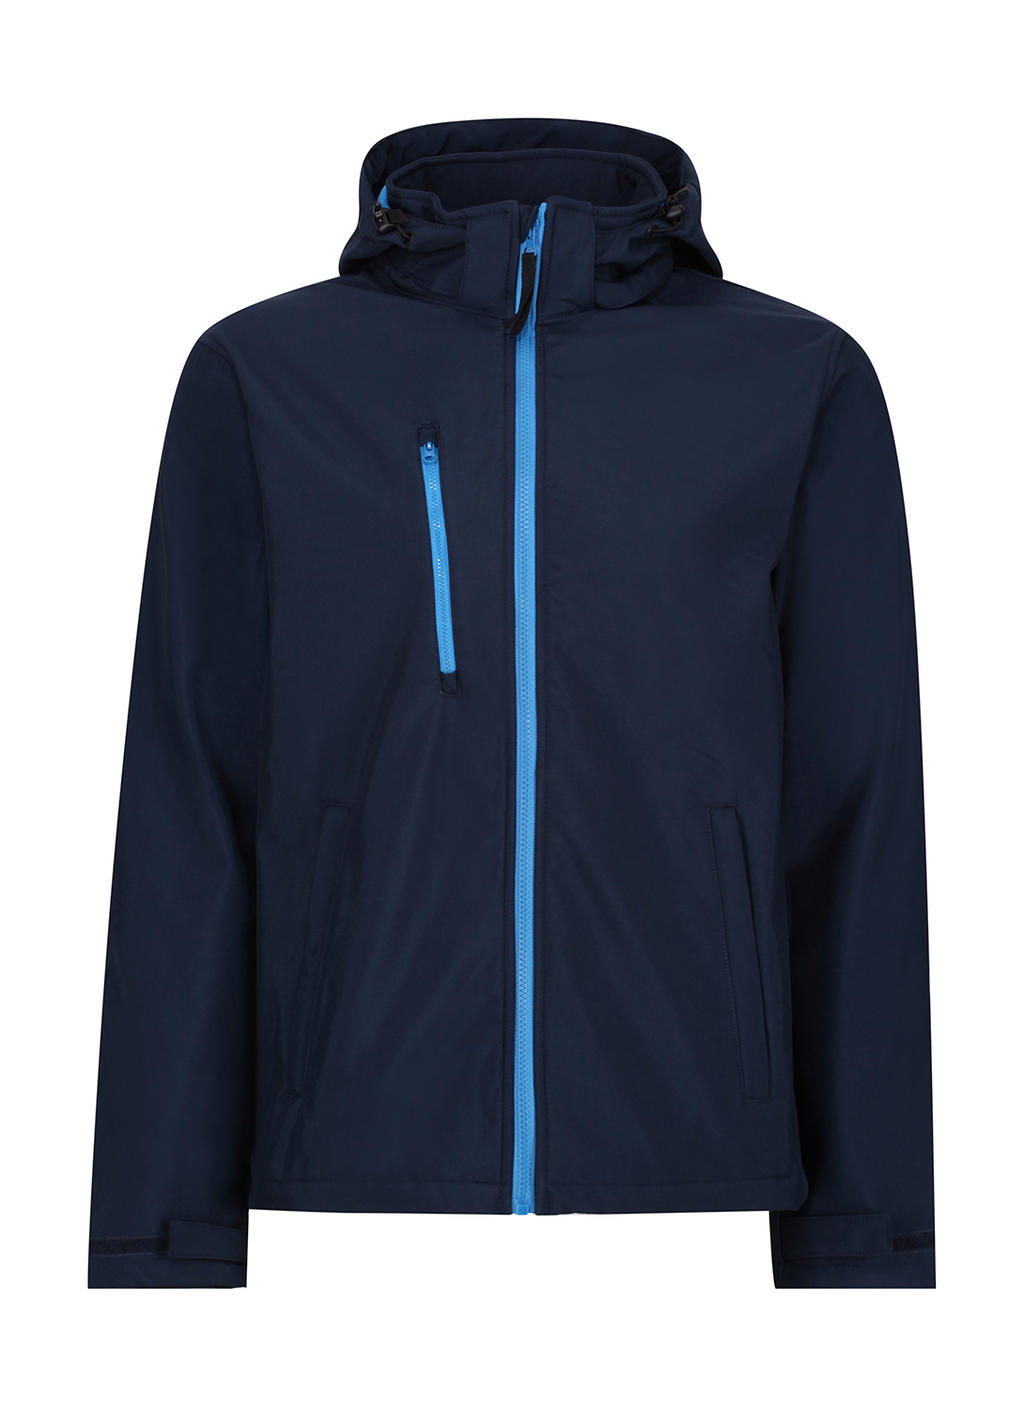  Venturer 3-Layer Hooded Softshell Jacket in Farbe Navy/French Blue